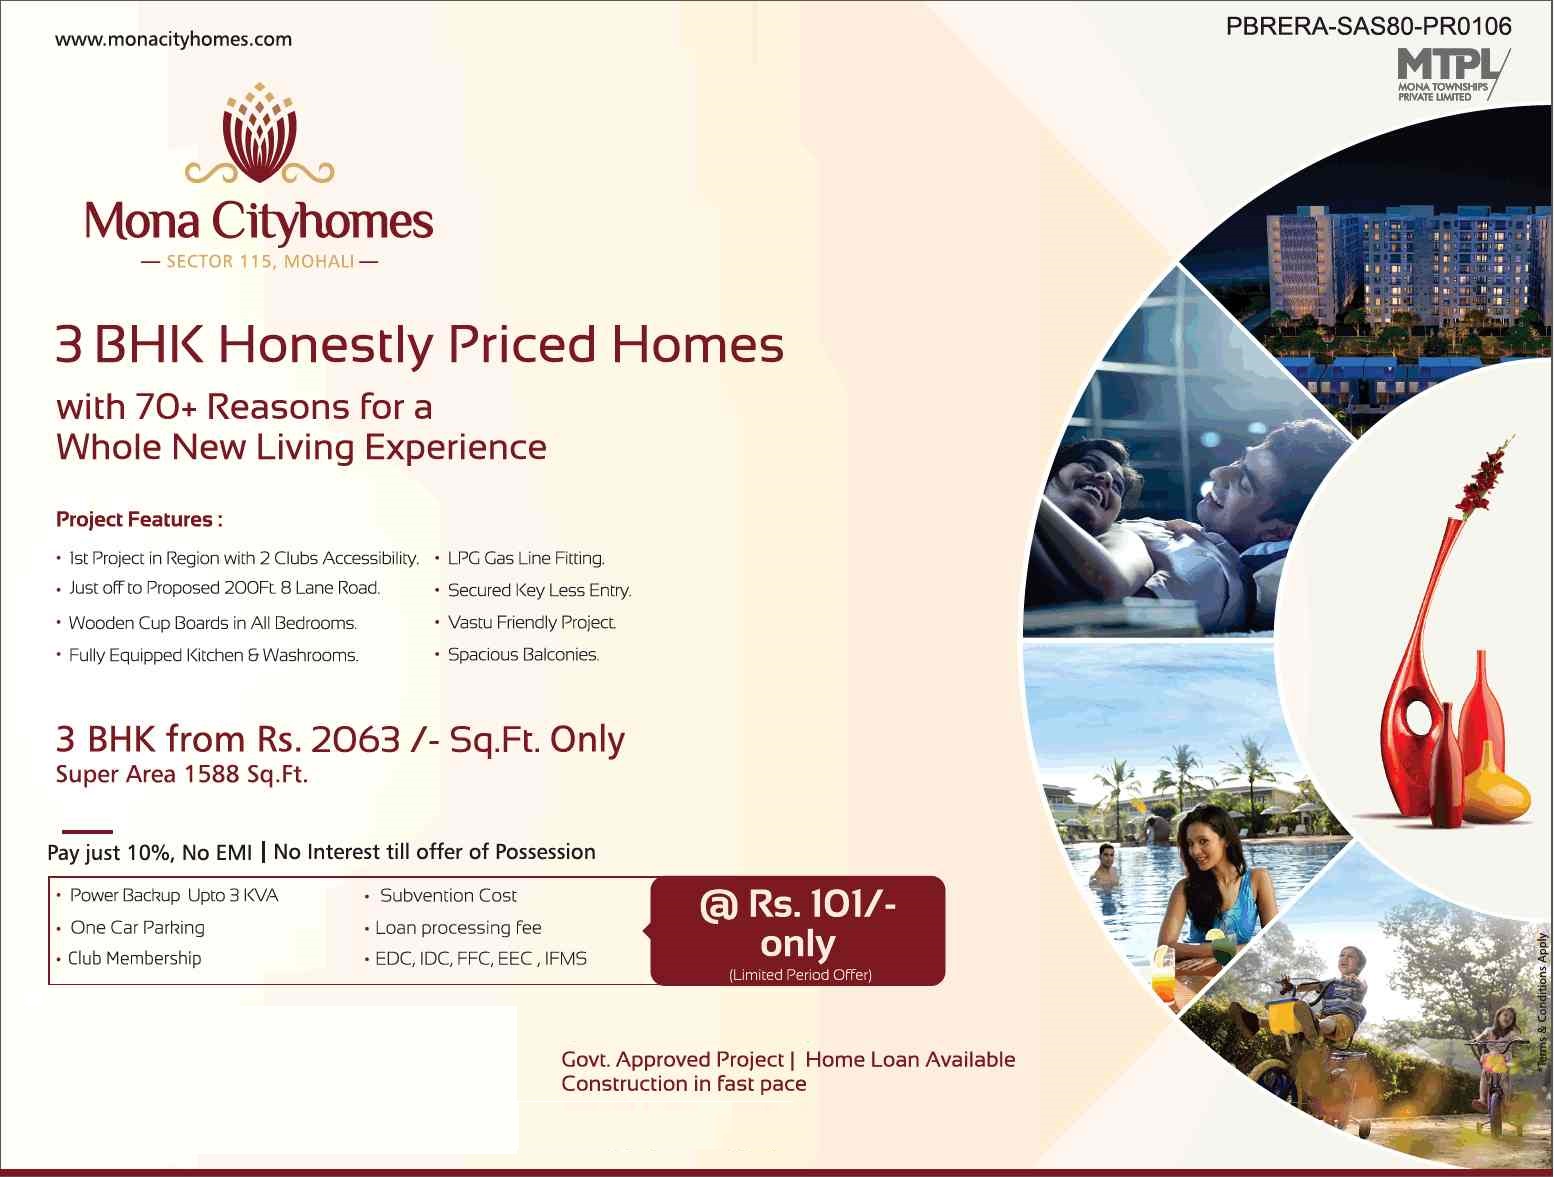 3 BHK Honestly Priced Homes at Mona Cityhomes, Mohali Update